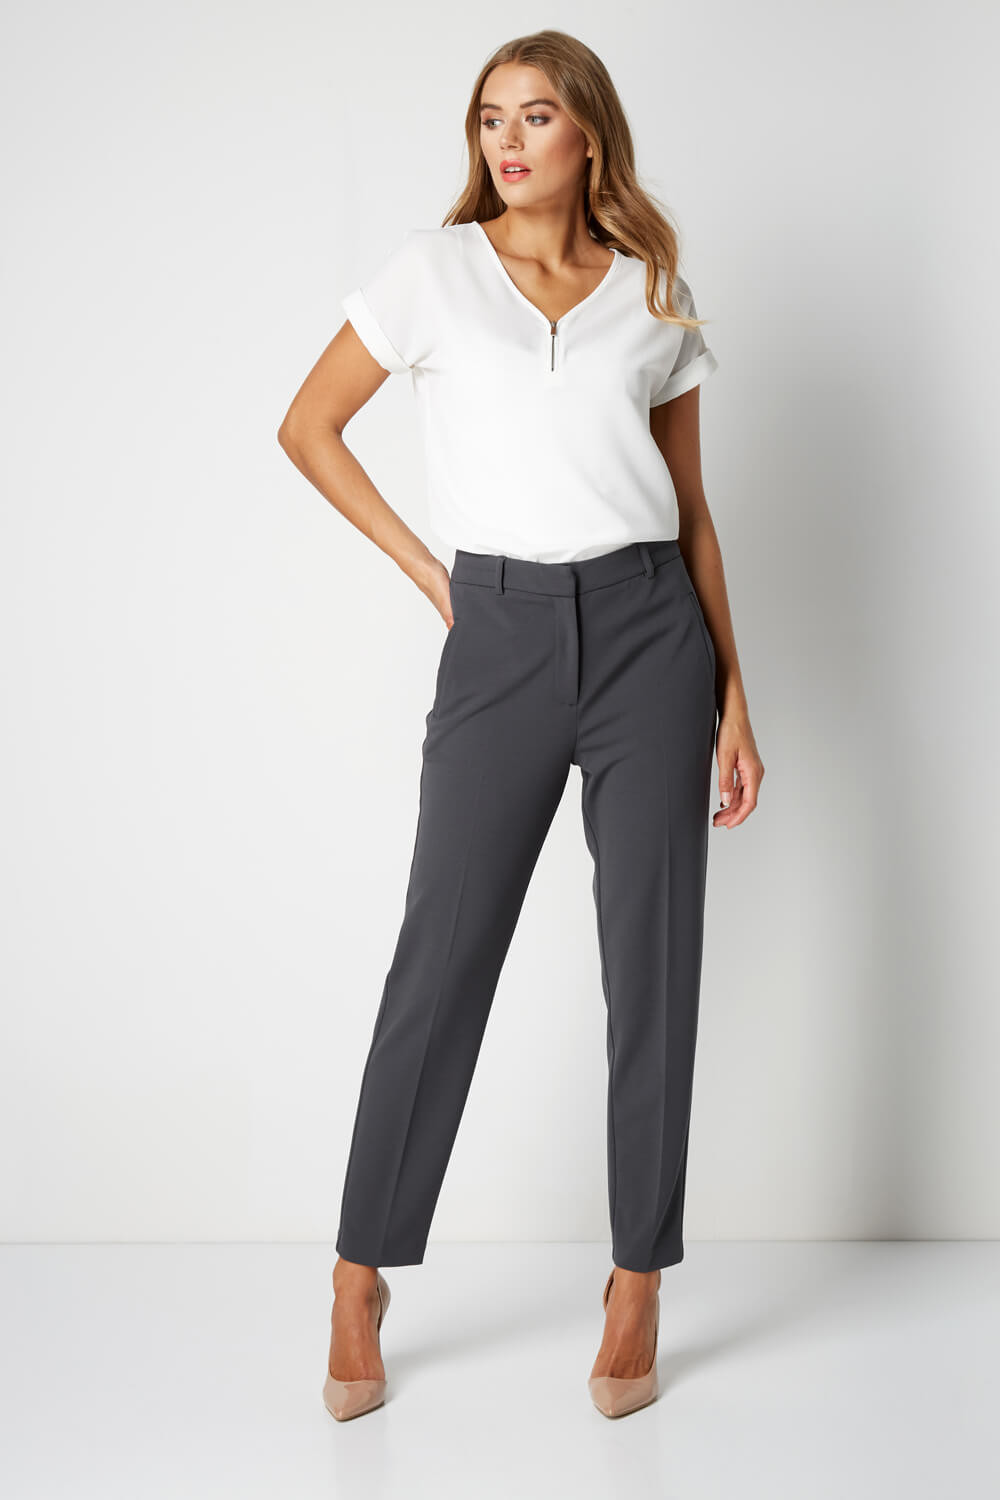 Rules for Petites, Pants Edition - PureWow